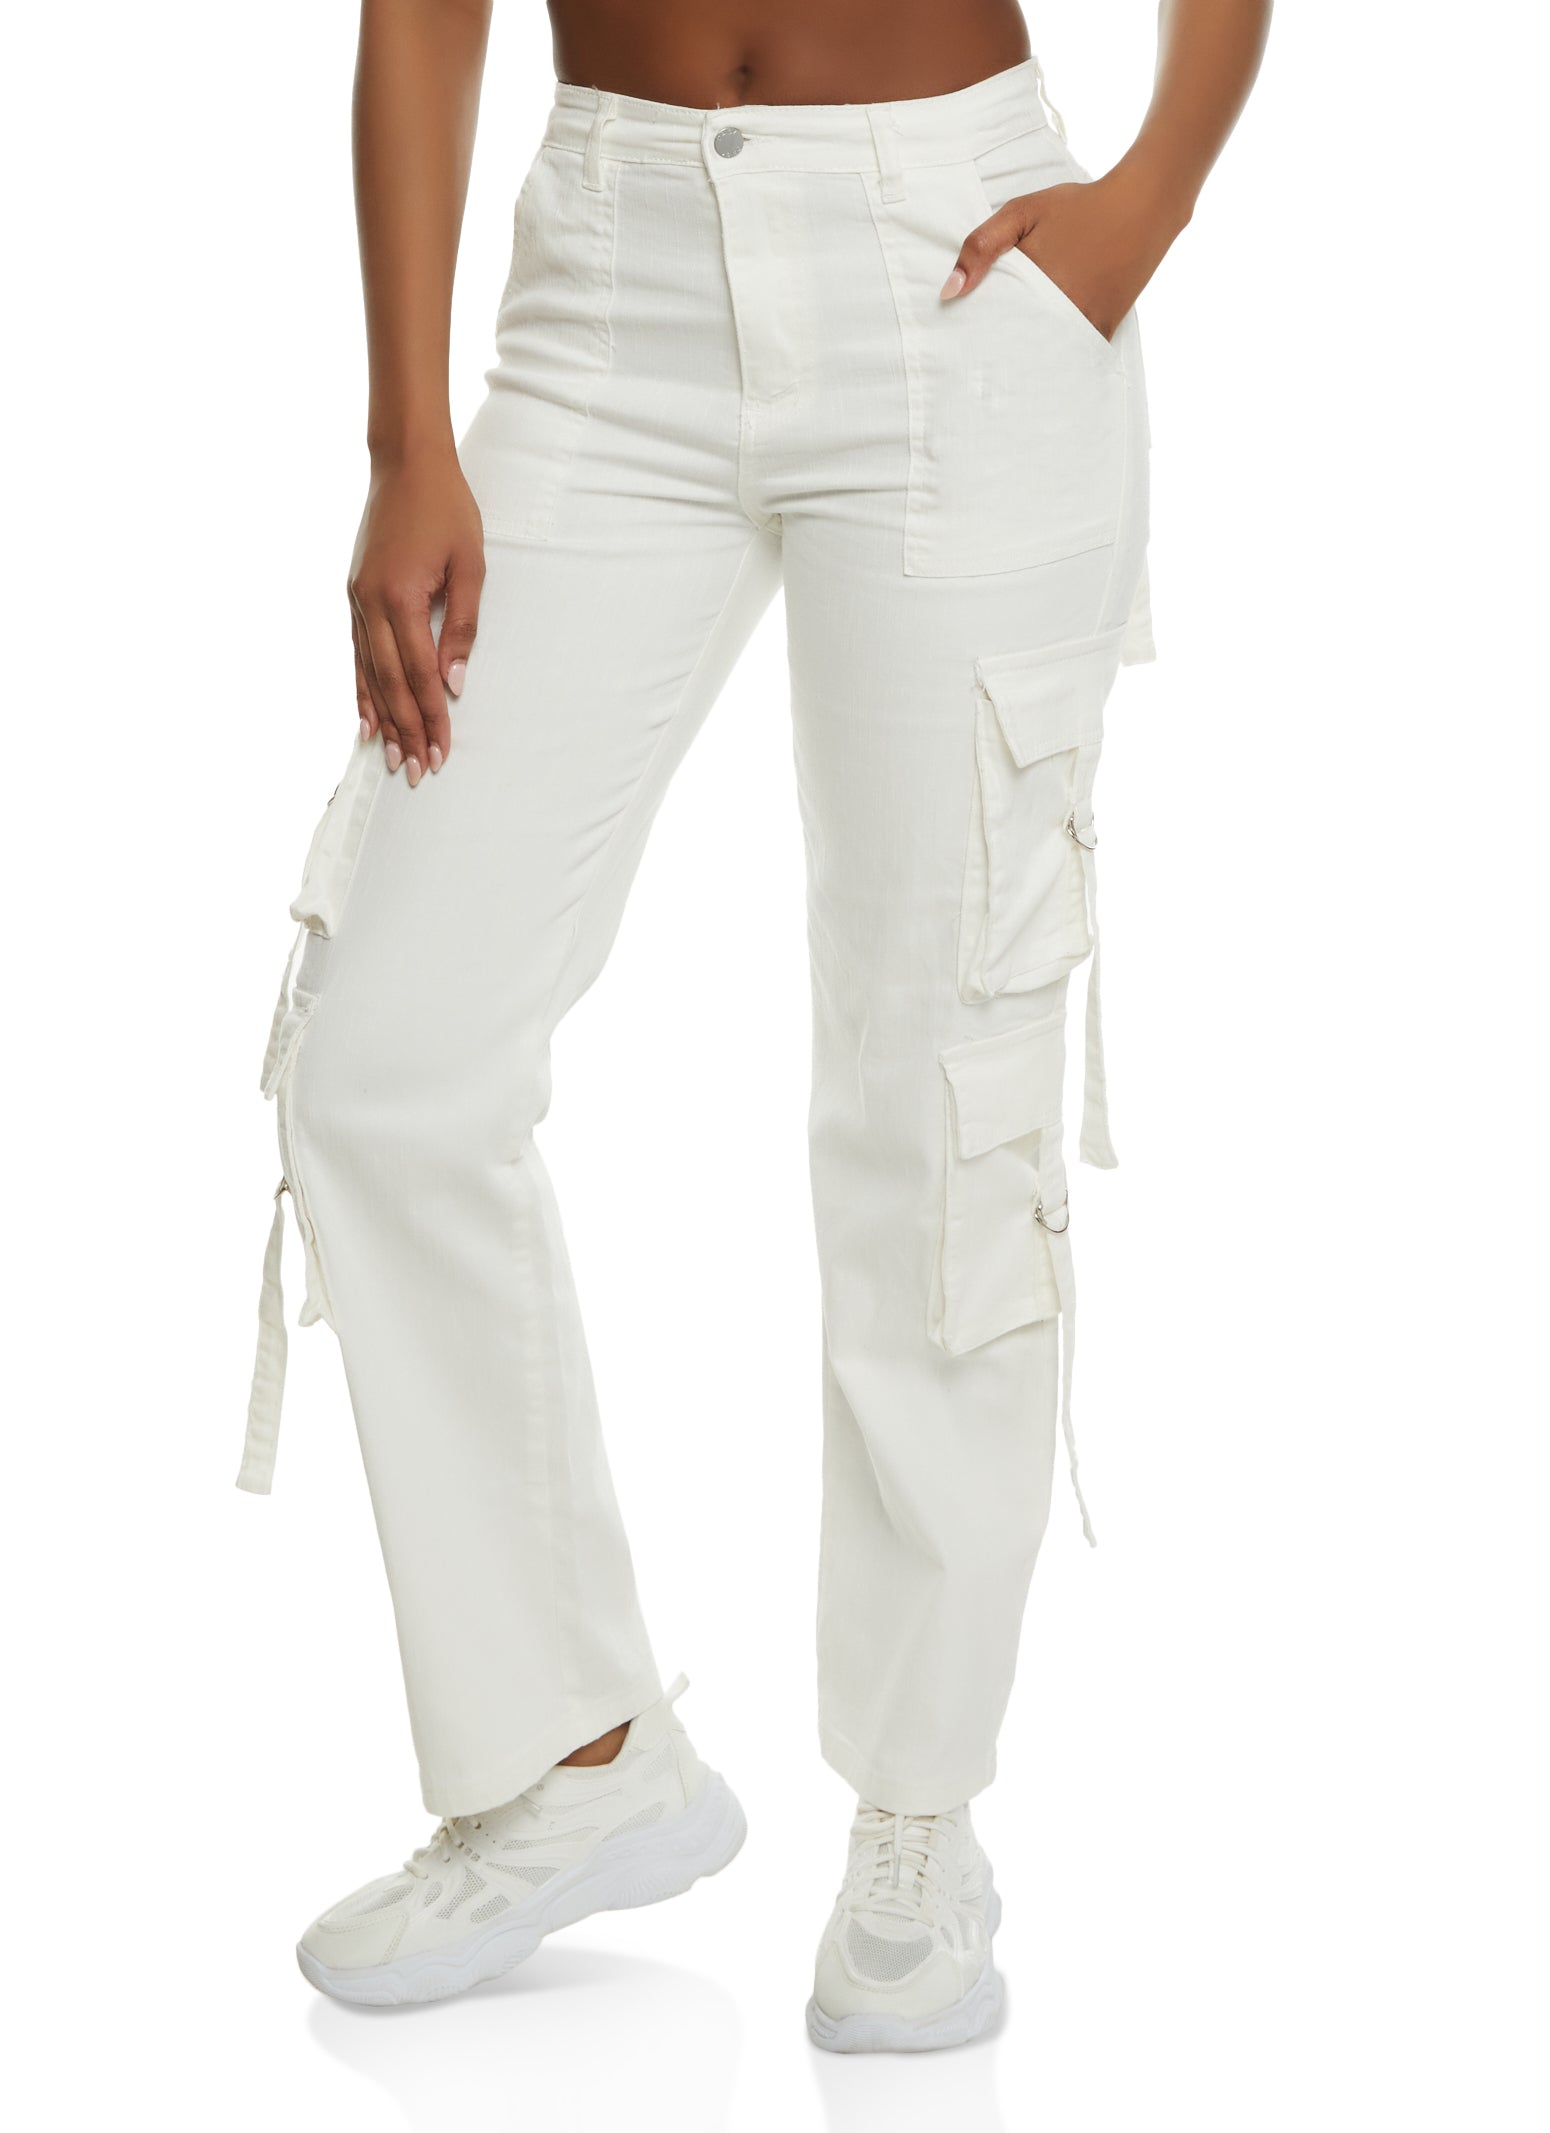 Womens White Pants, Everyday Low Prices